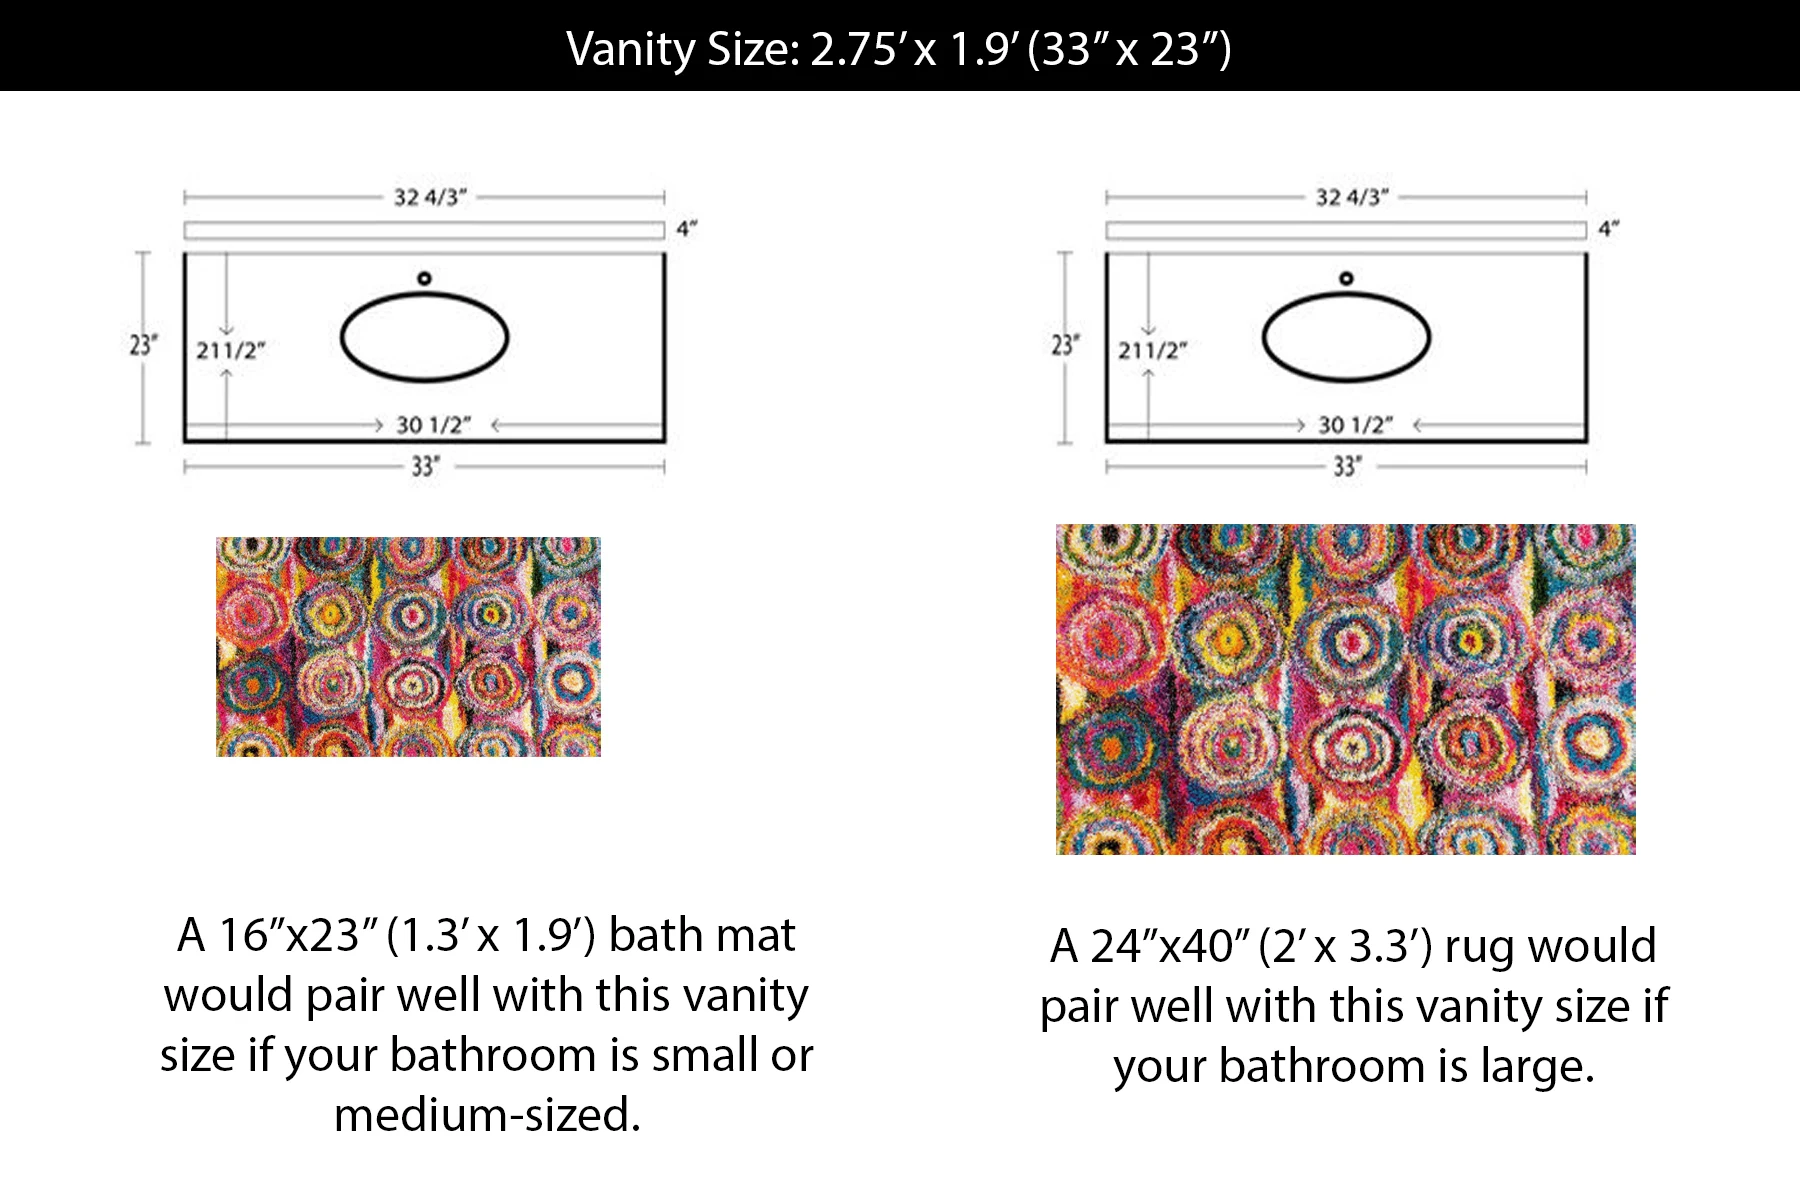 Bathroom Vanity Rug And Mat Size, What Is The Smallest Size Bathroom Rug